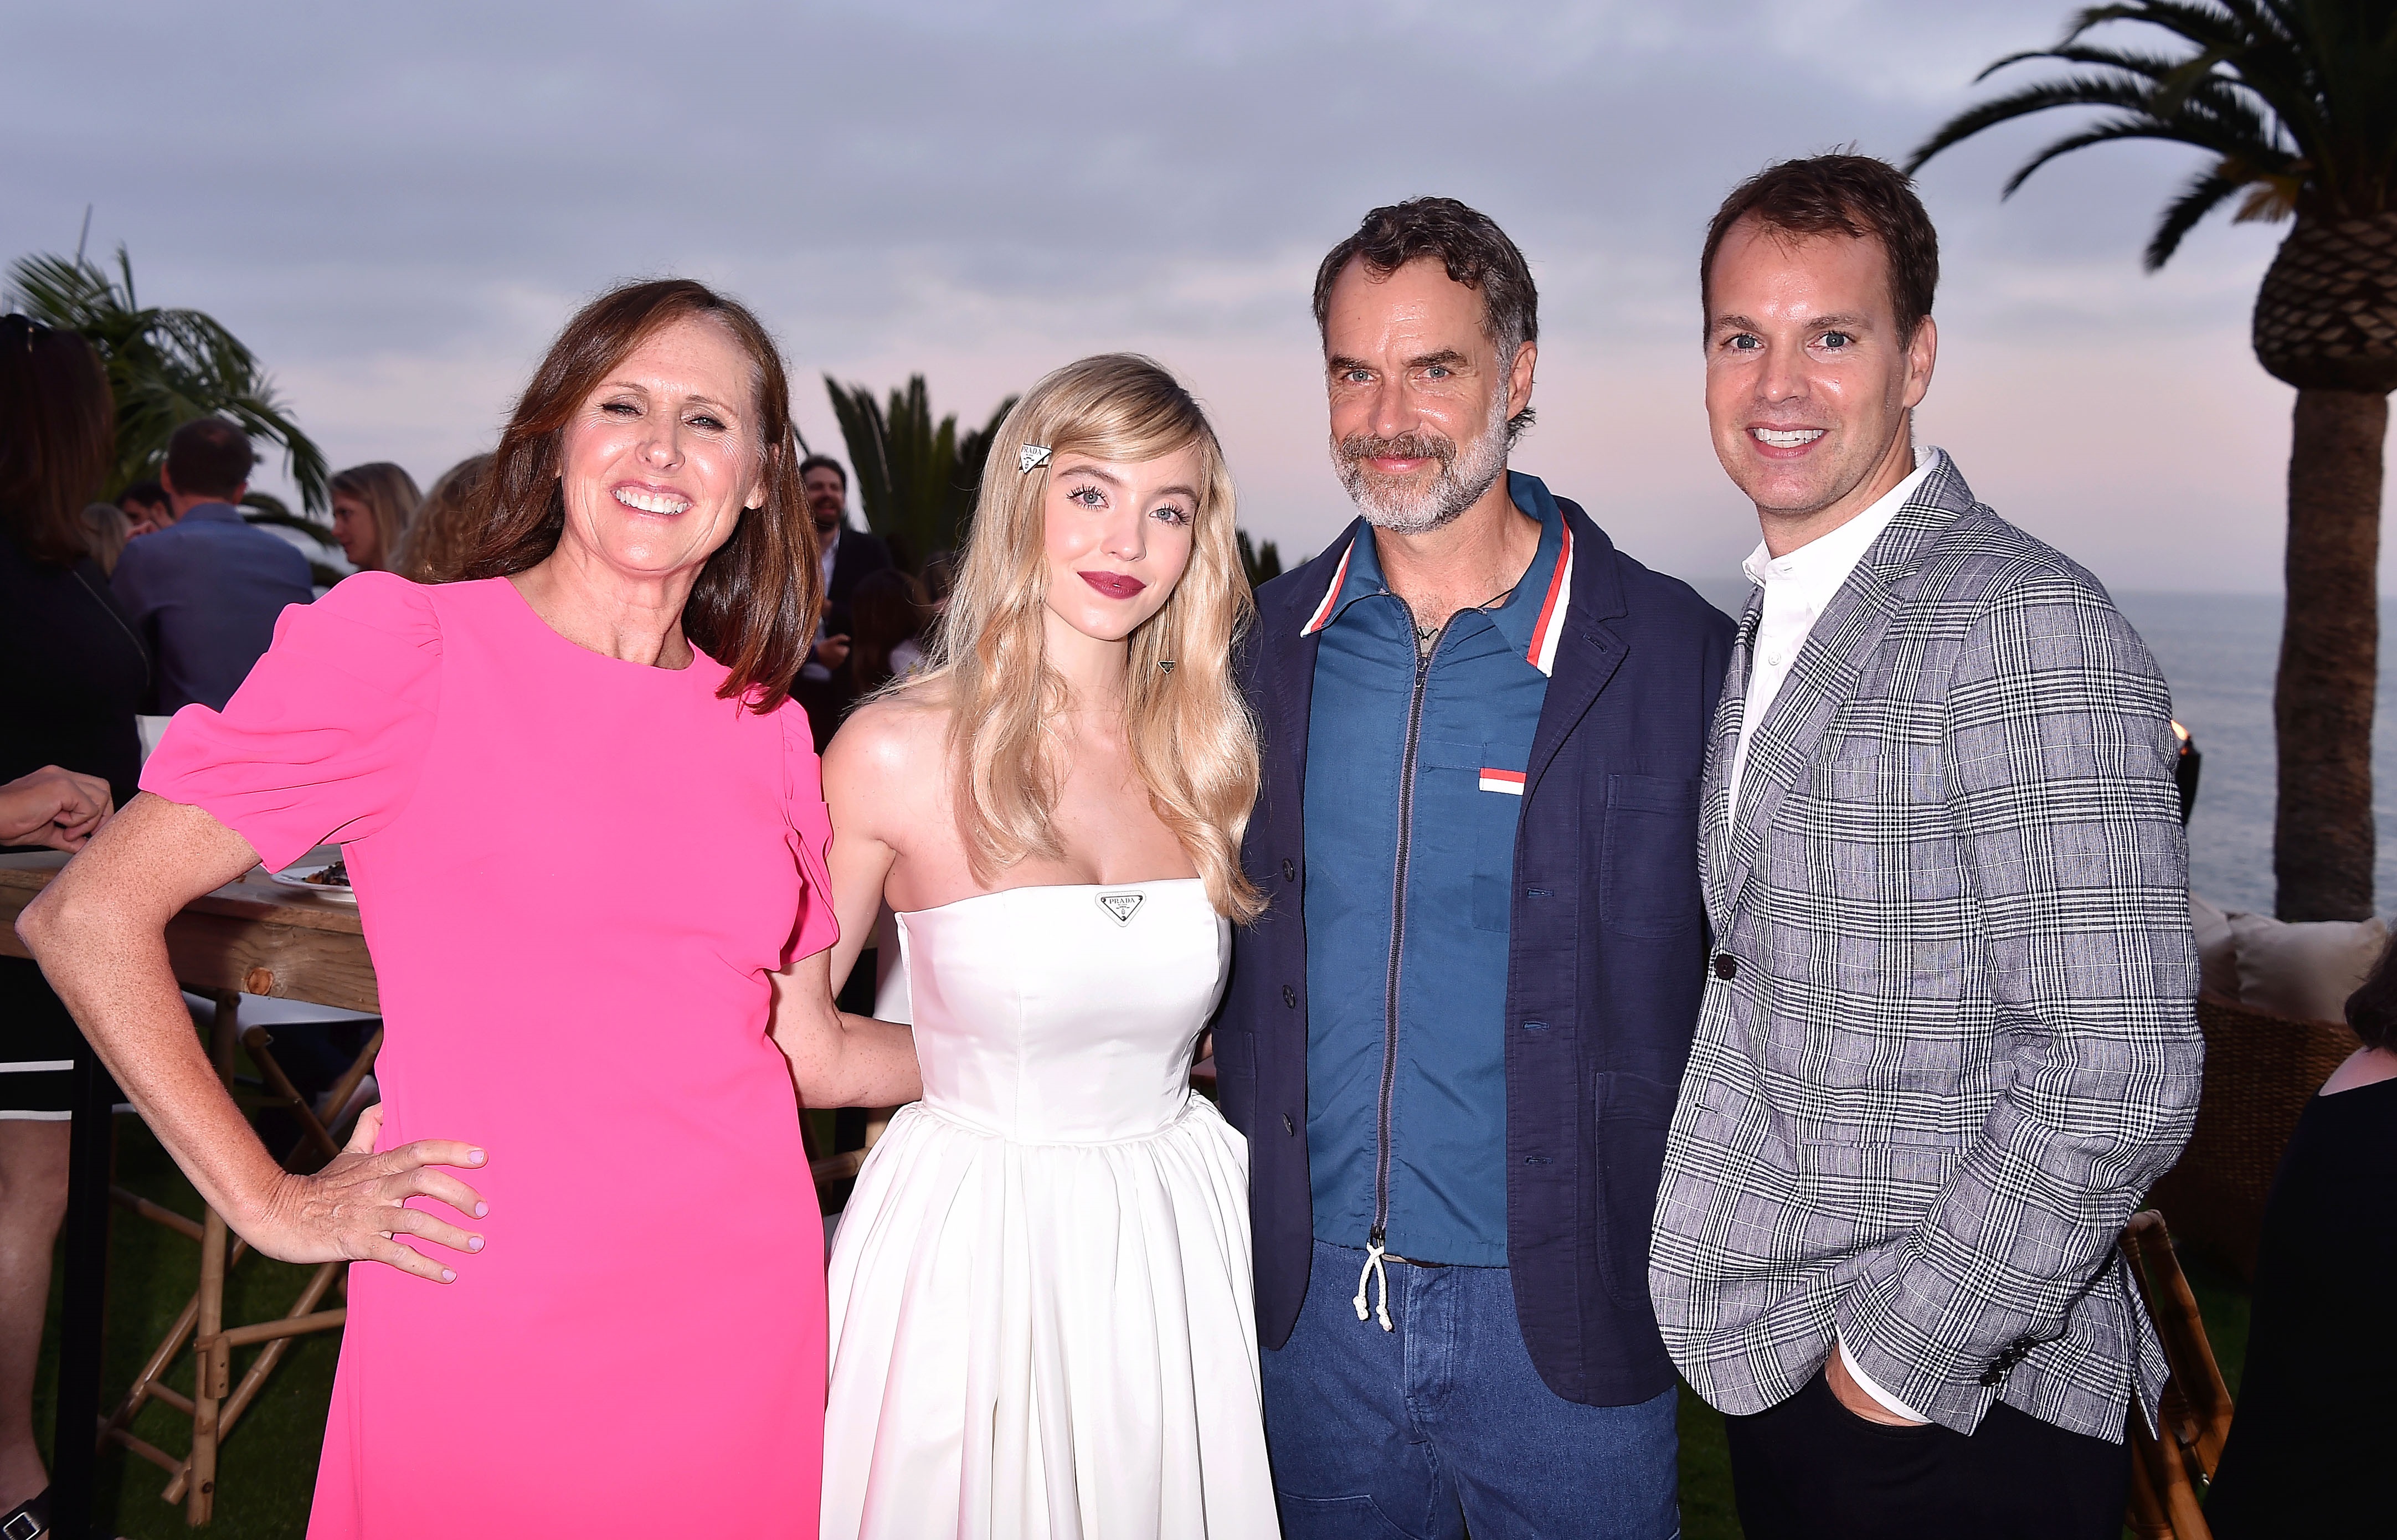 HBO The White Lotus Molly Shannon, Sydney Sweeney, Murray Bartlett and Chief Content Officer Casey Bloys